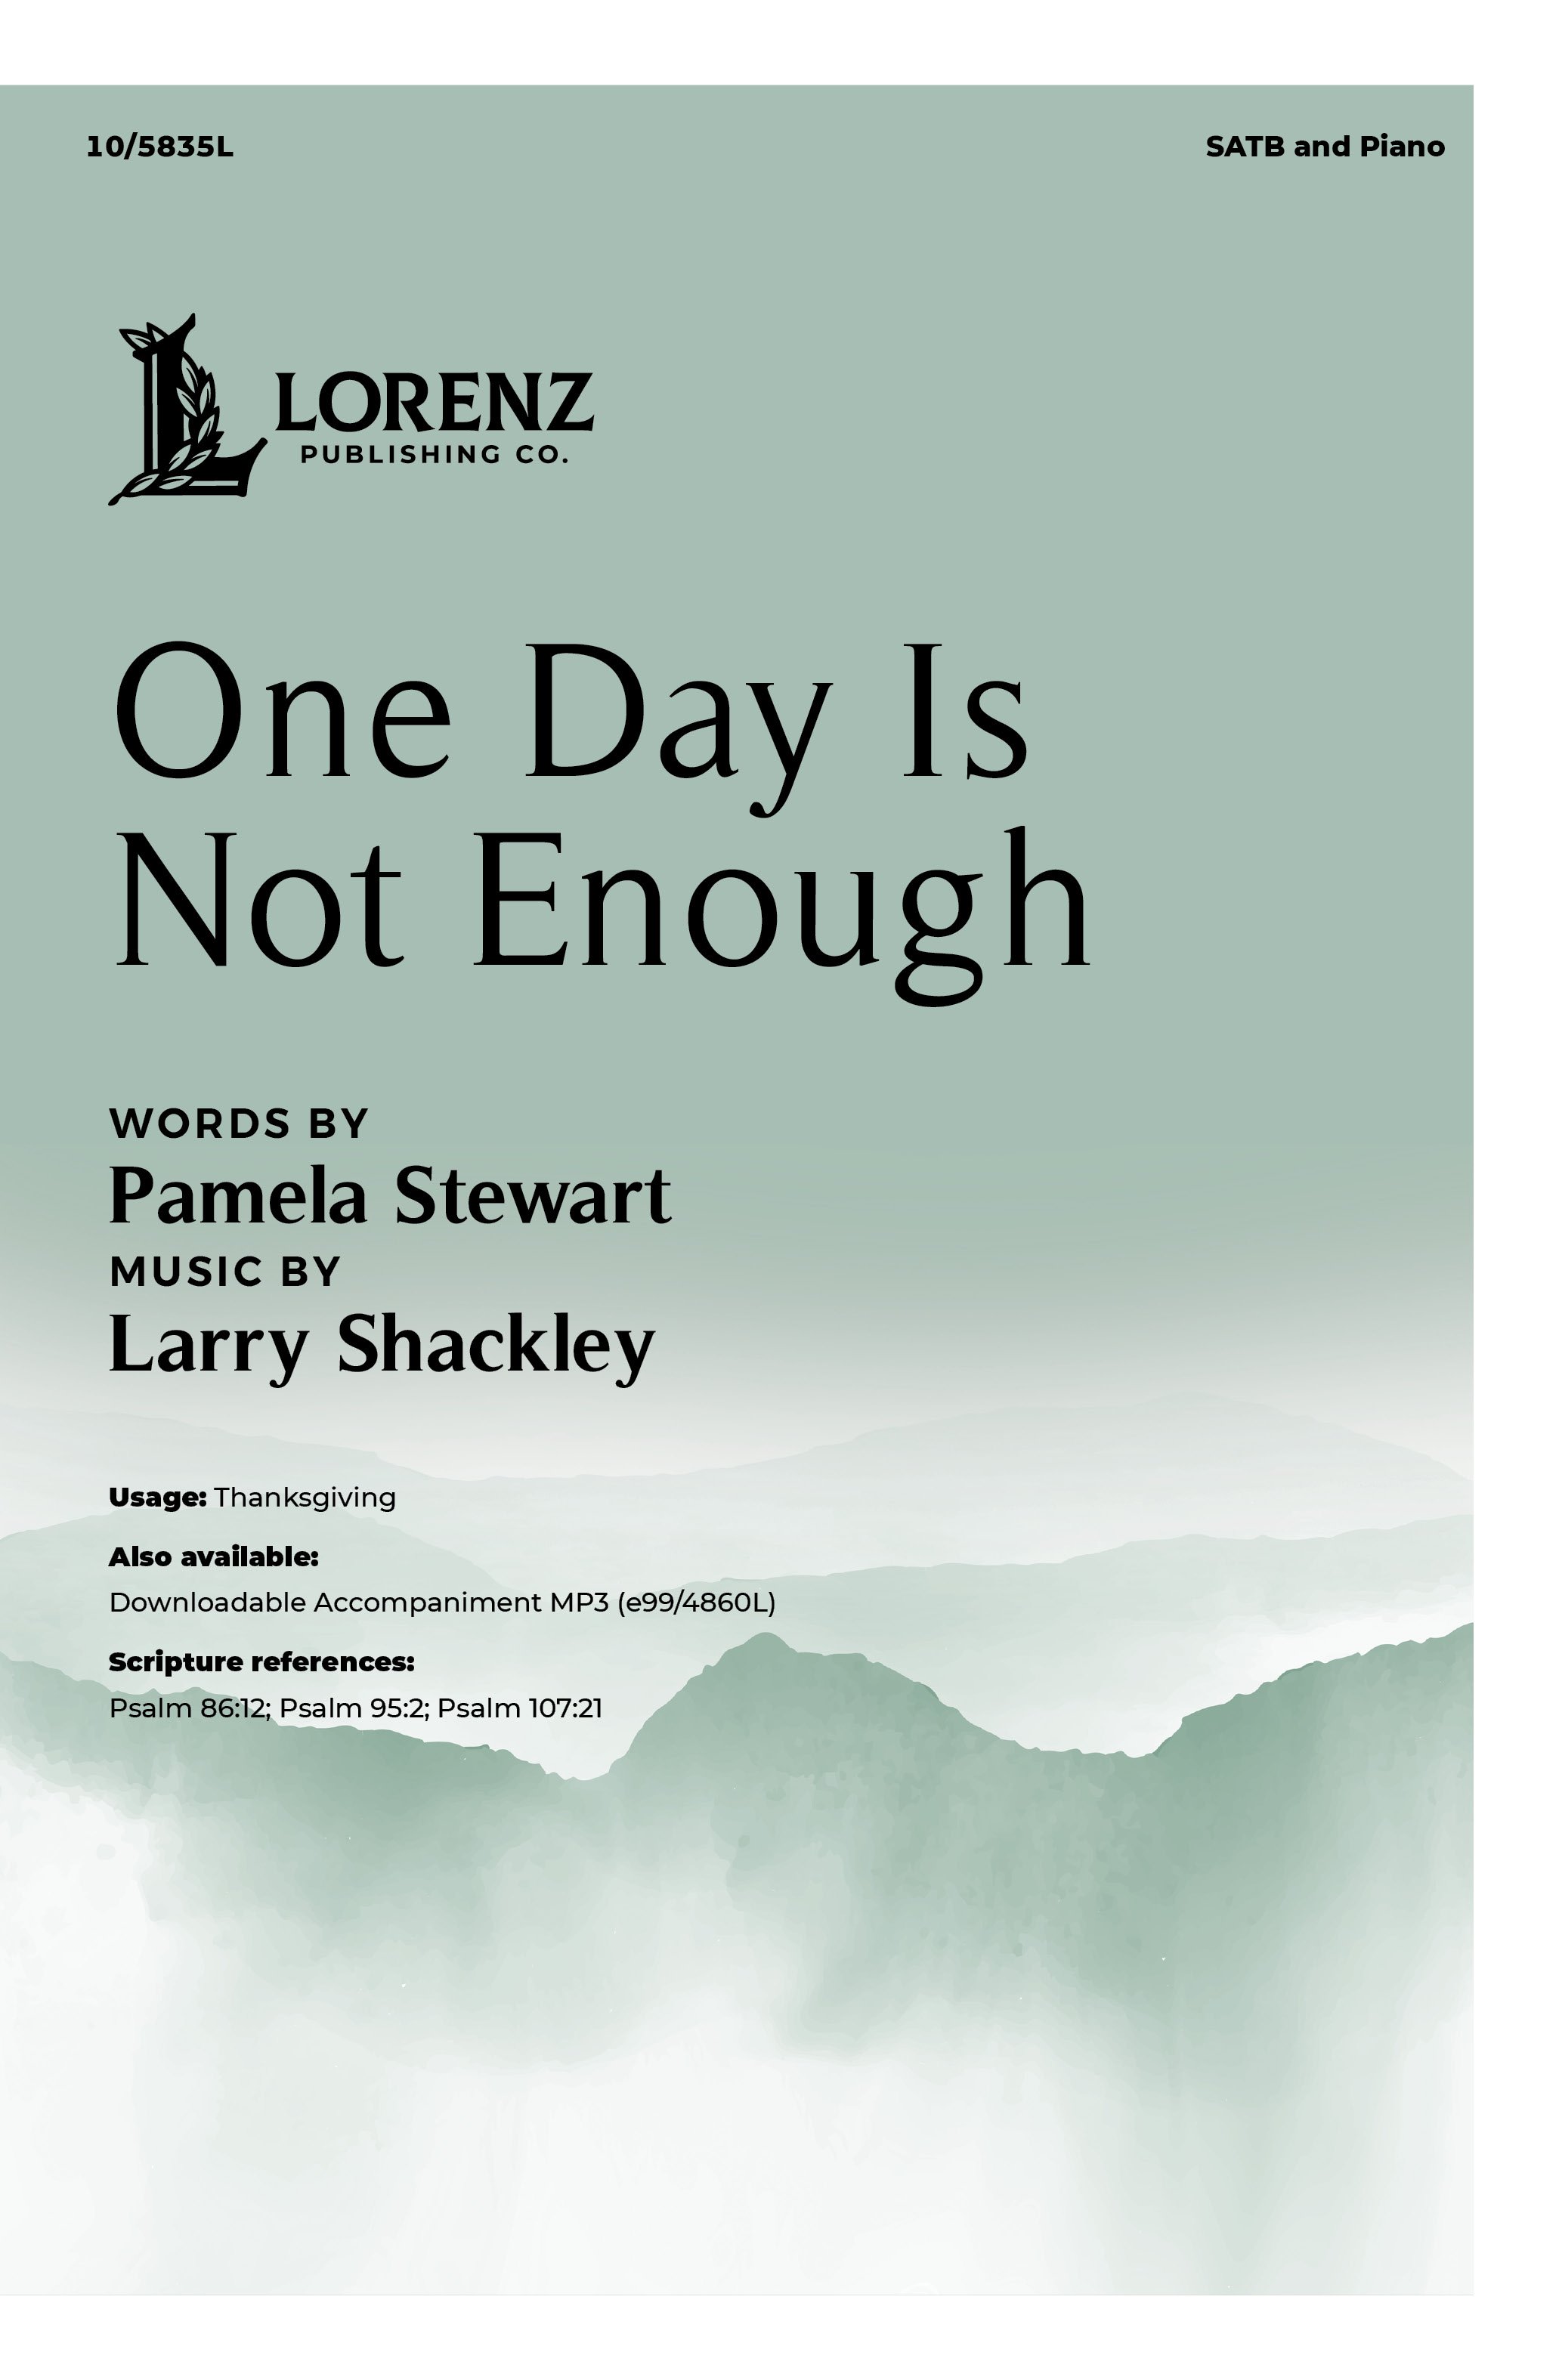 One Day Is Not Enough